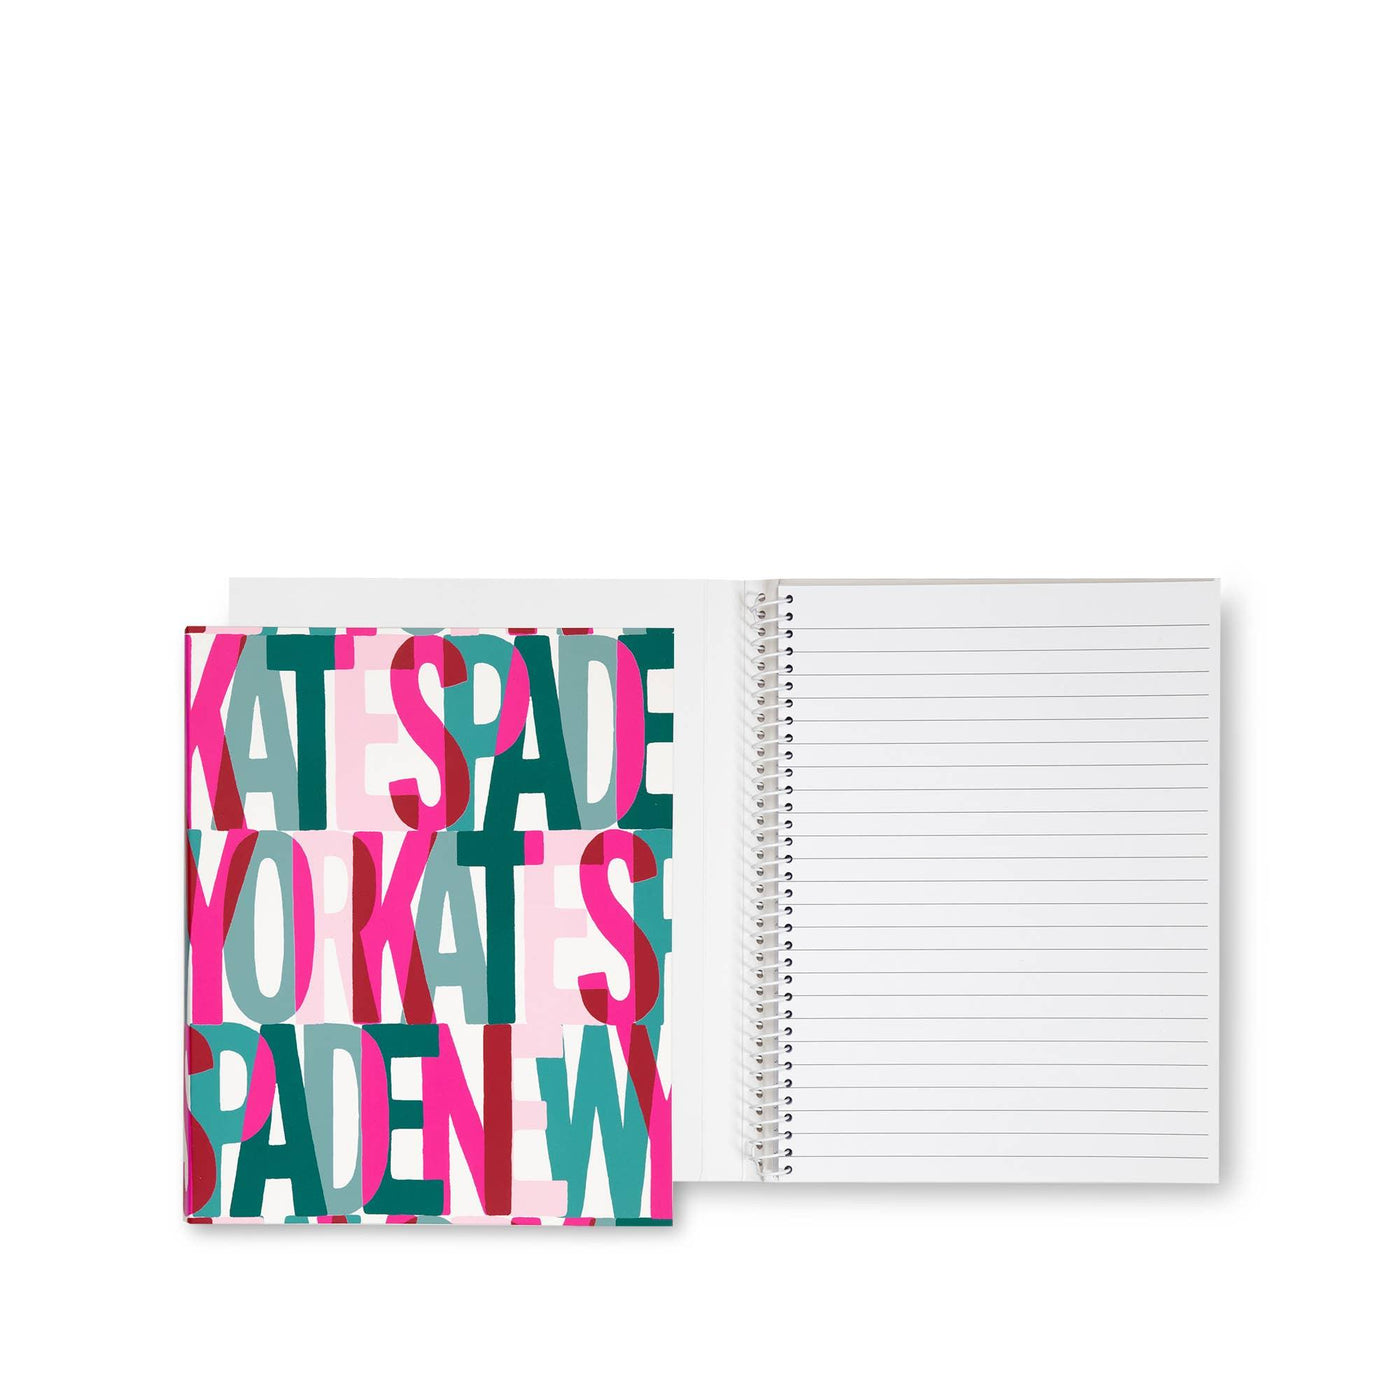 Pink, light pink, evergreen and mint green "Kate Spade' printed all over the front with a concealed spiral